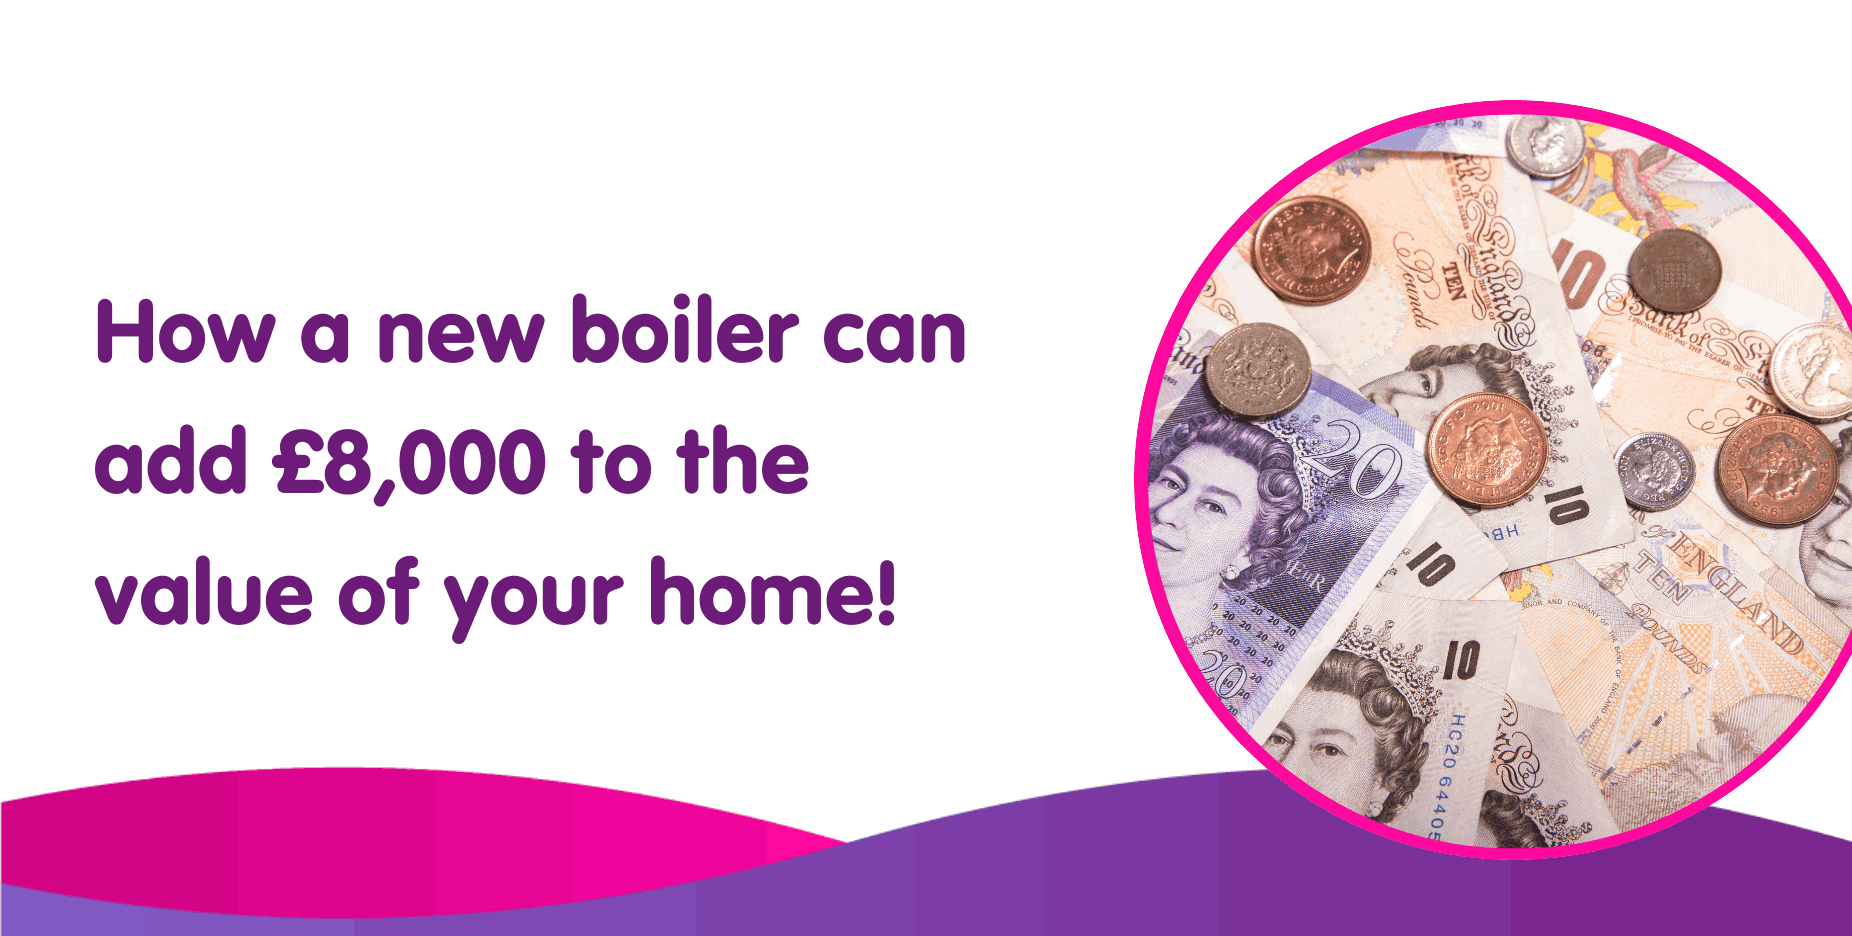 How a new boiler can add £8,000 to the value of your home!